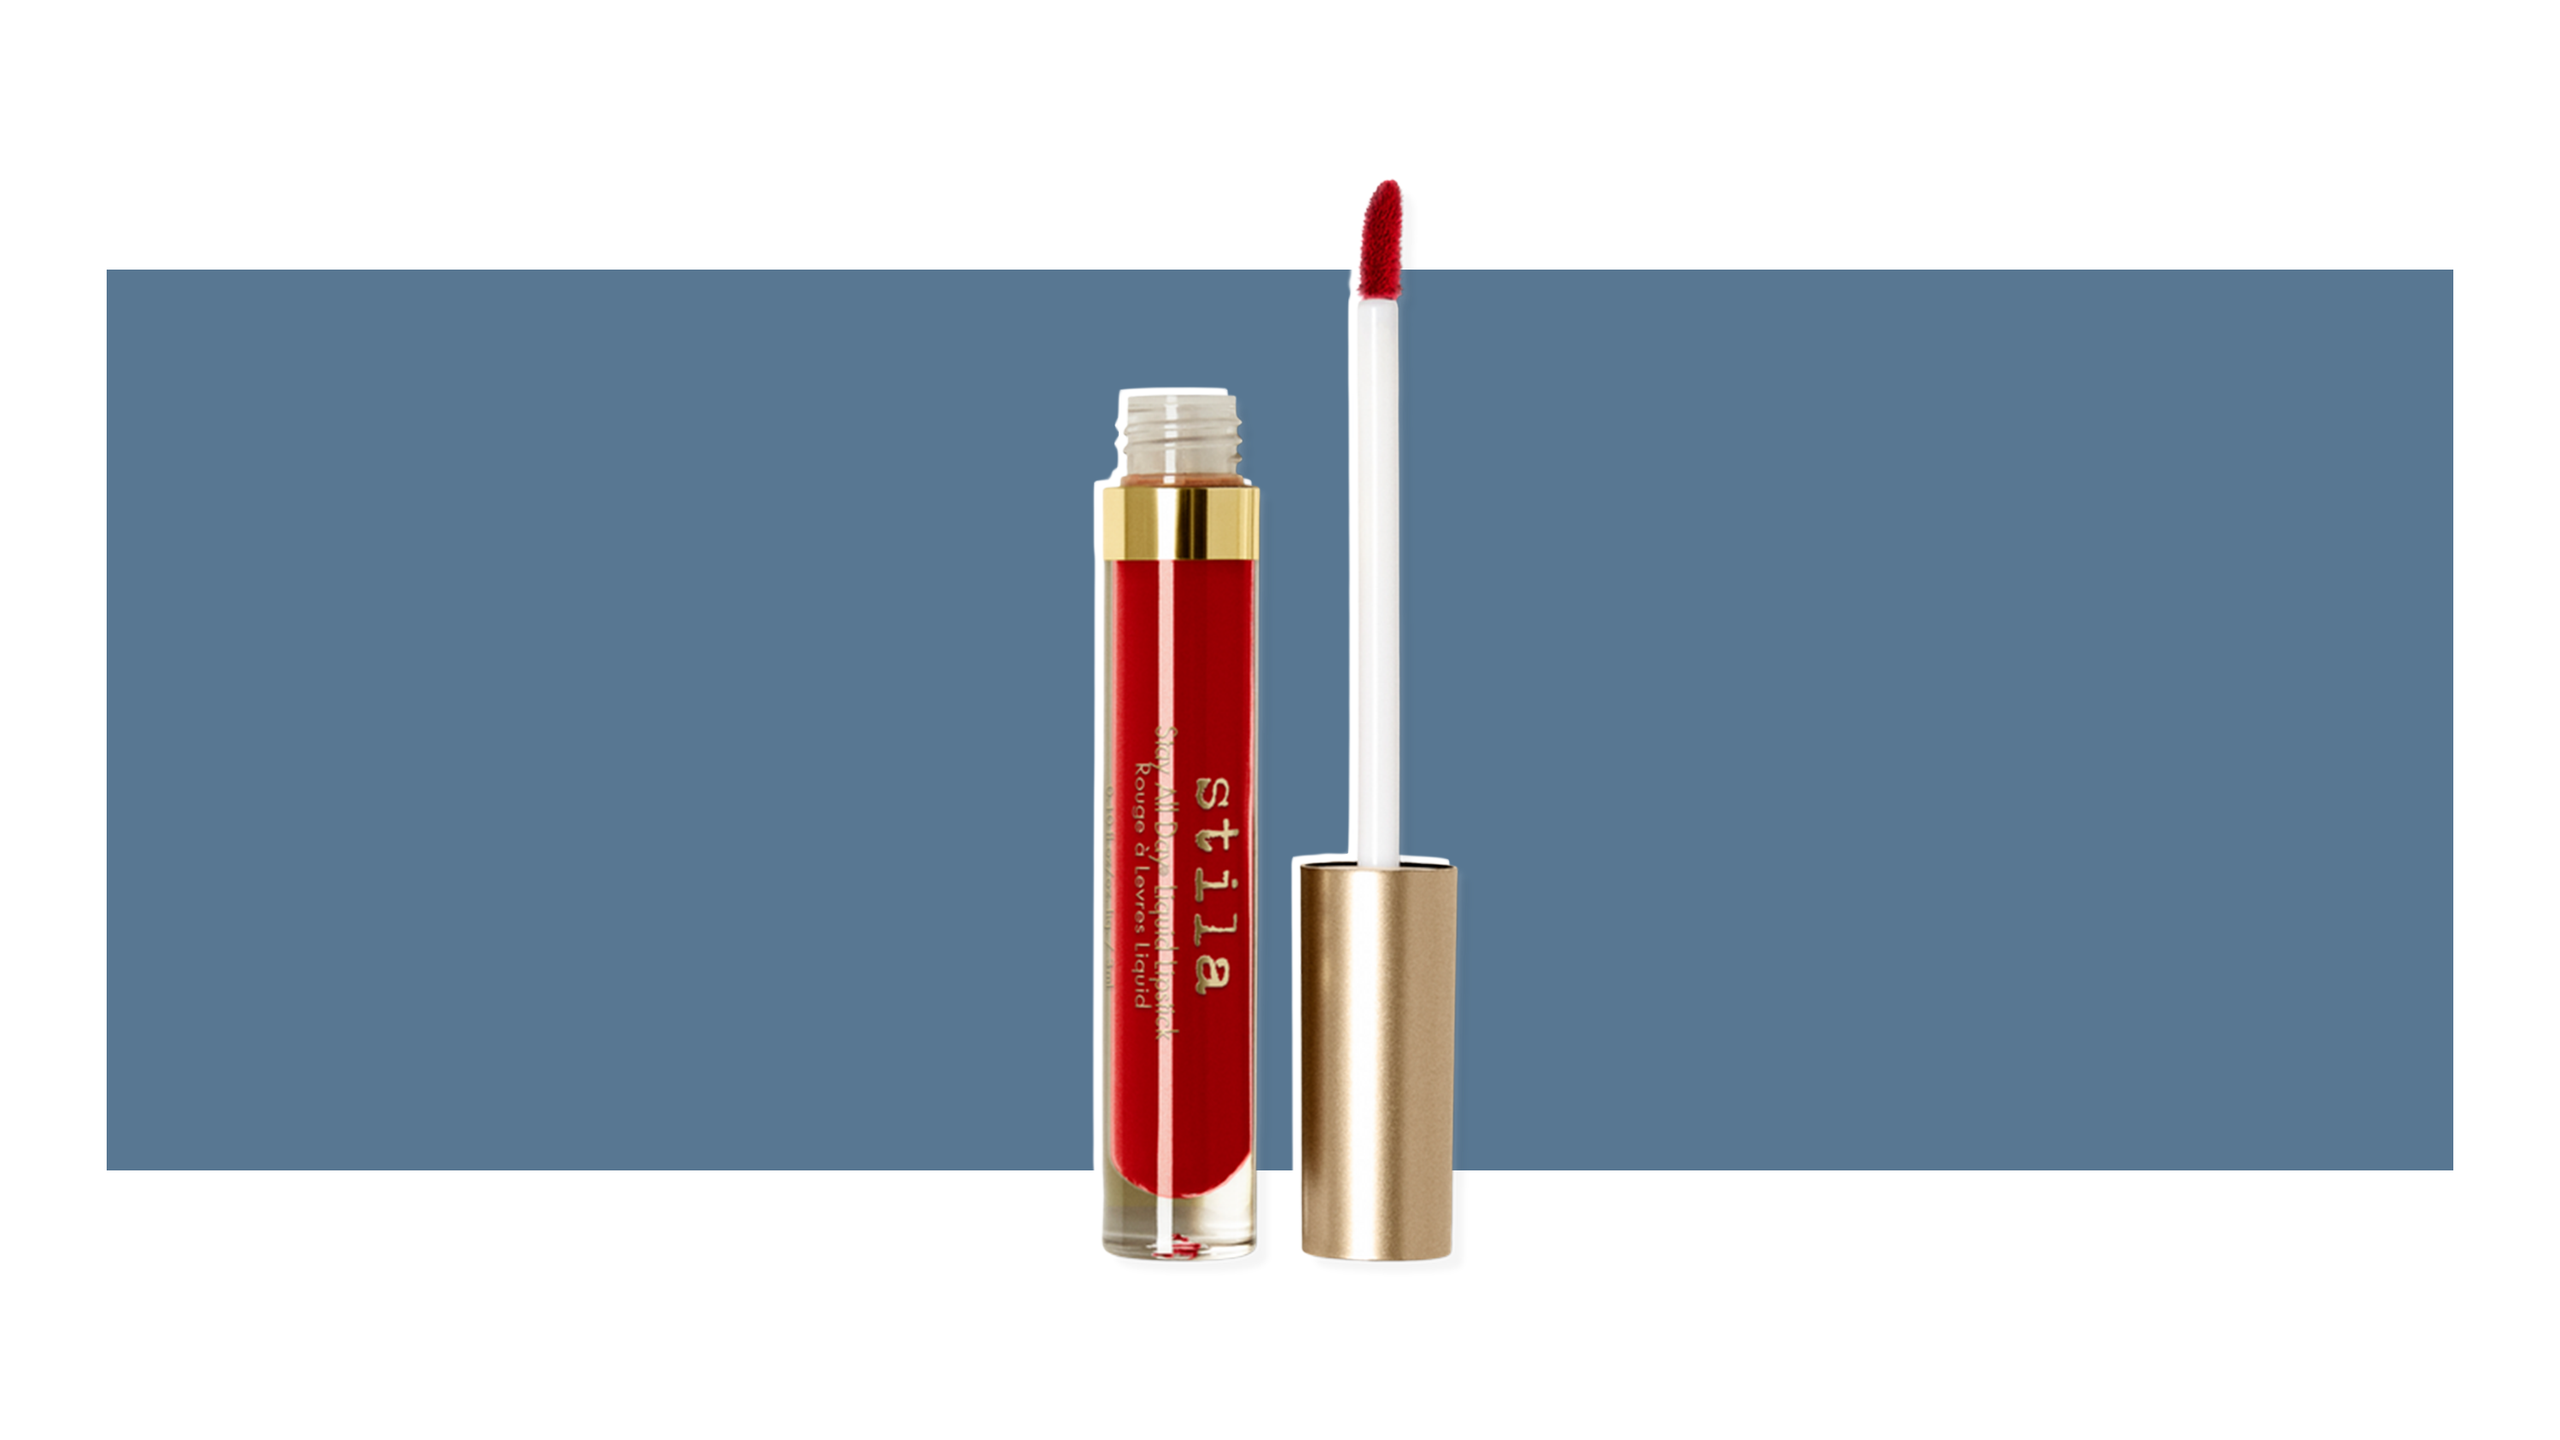 Get a matte finish with the Stila Stay All Day Matte Liquid Lipstick.